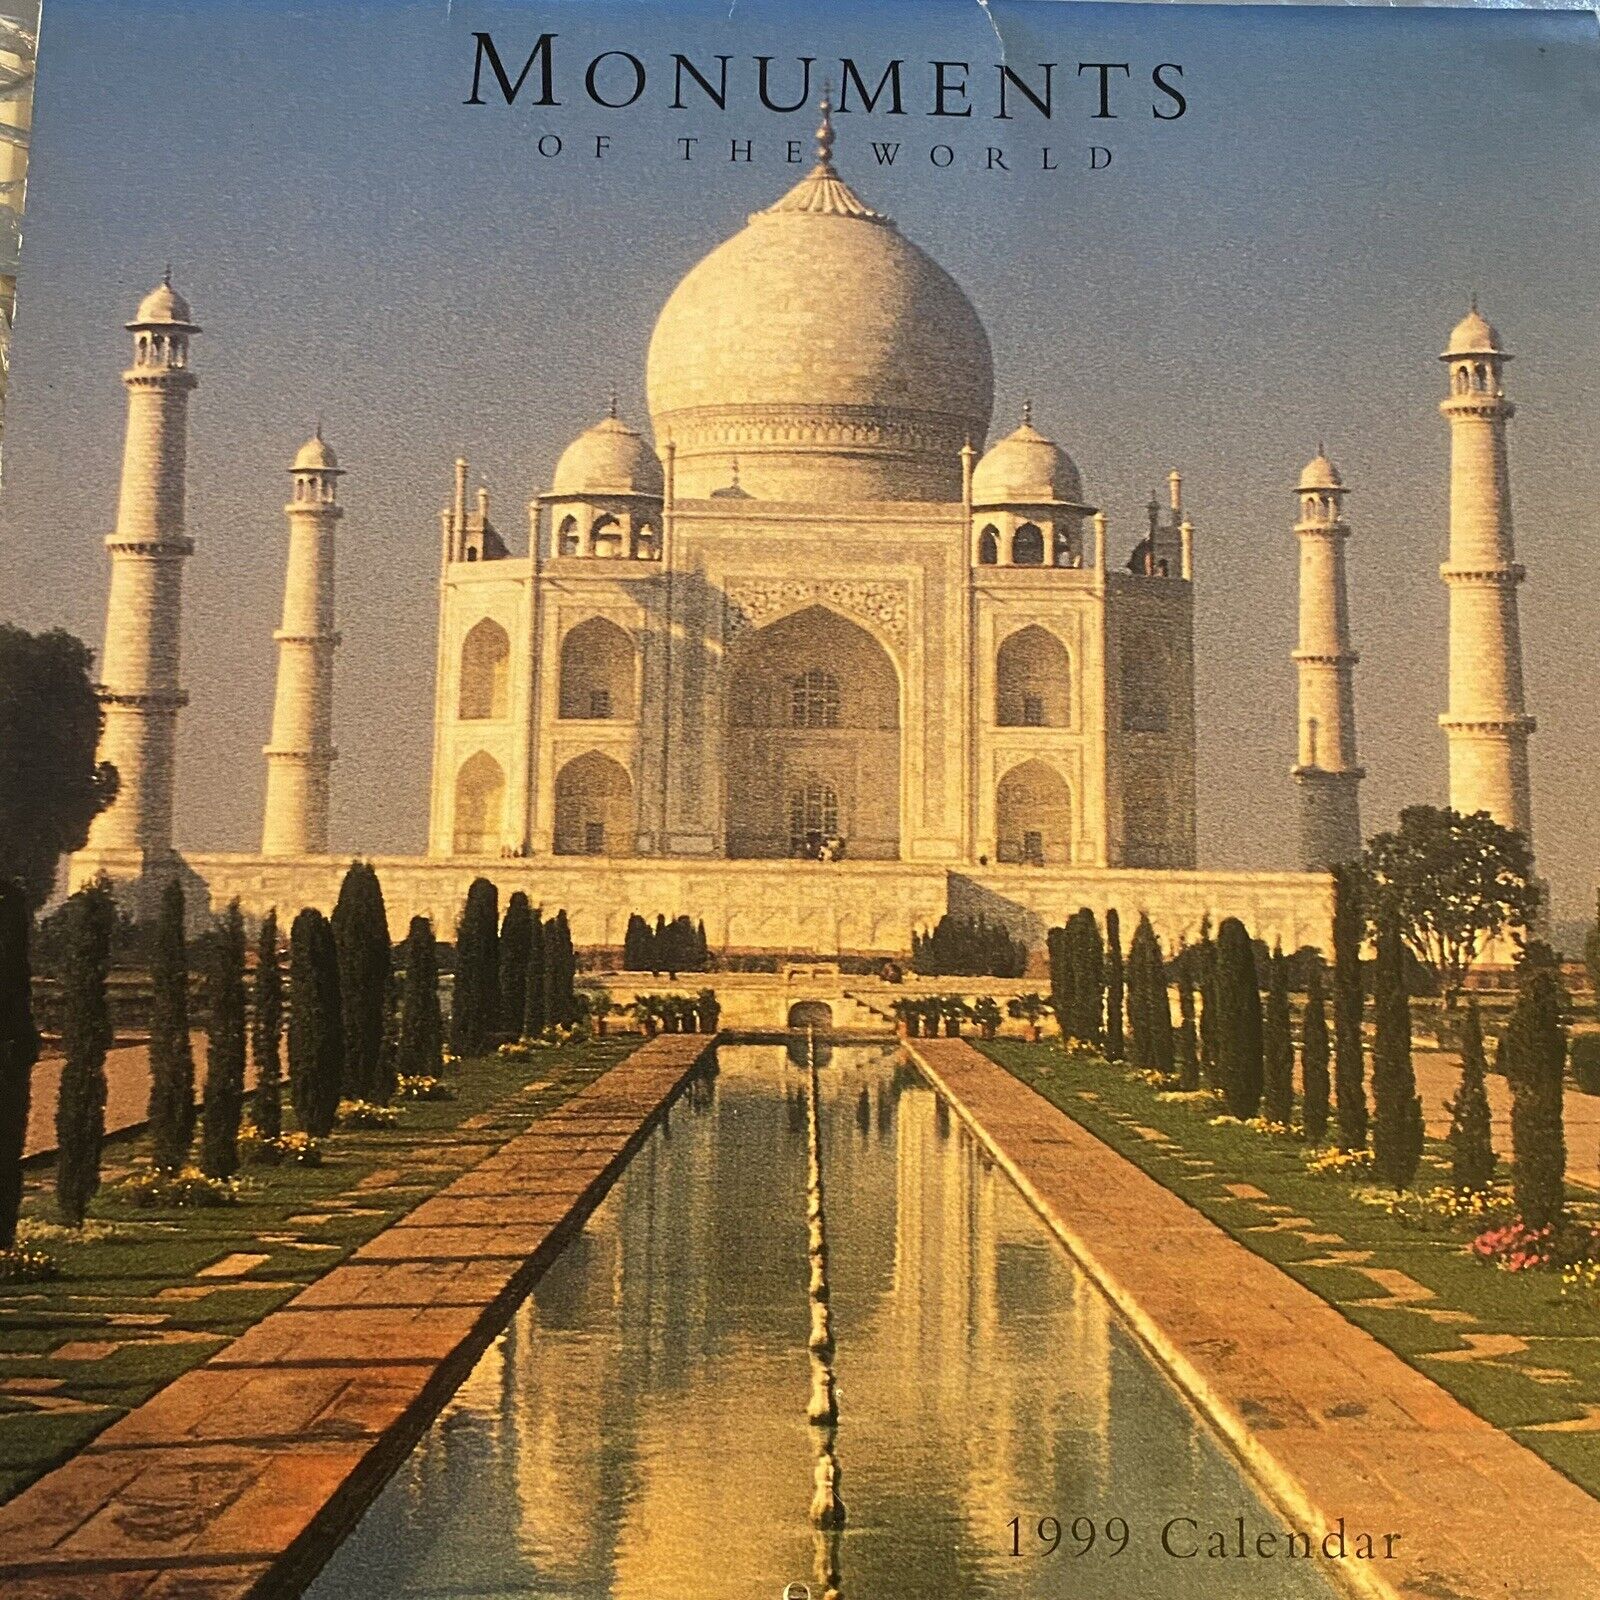 Vintage Pier 1 Monuments Of The World Wall Calendar 1999 Multiple Languages